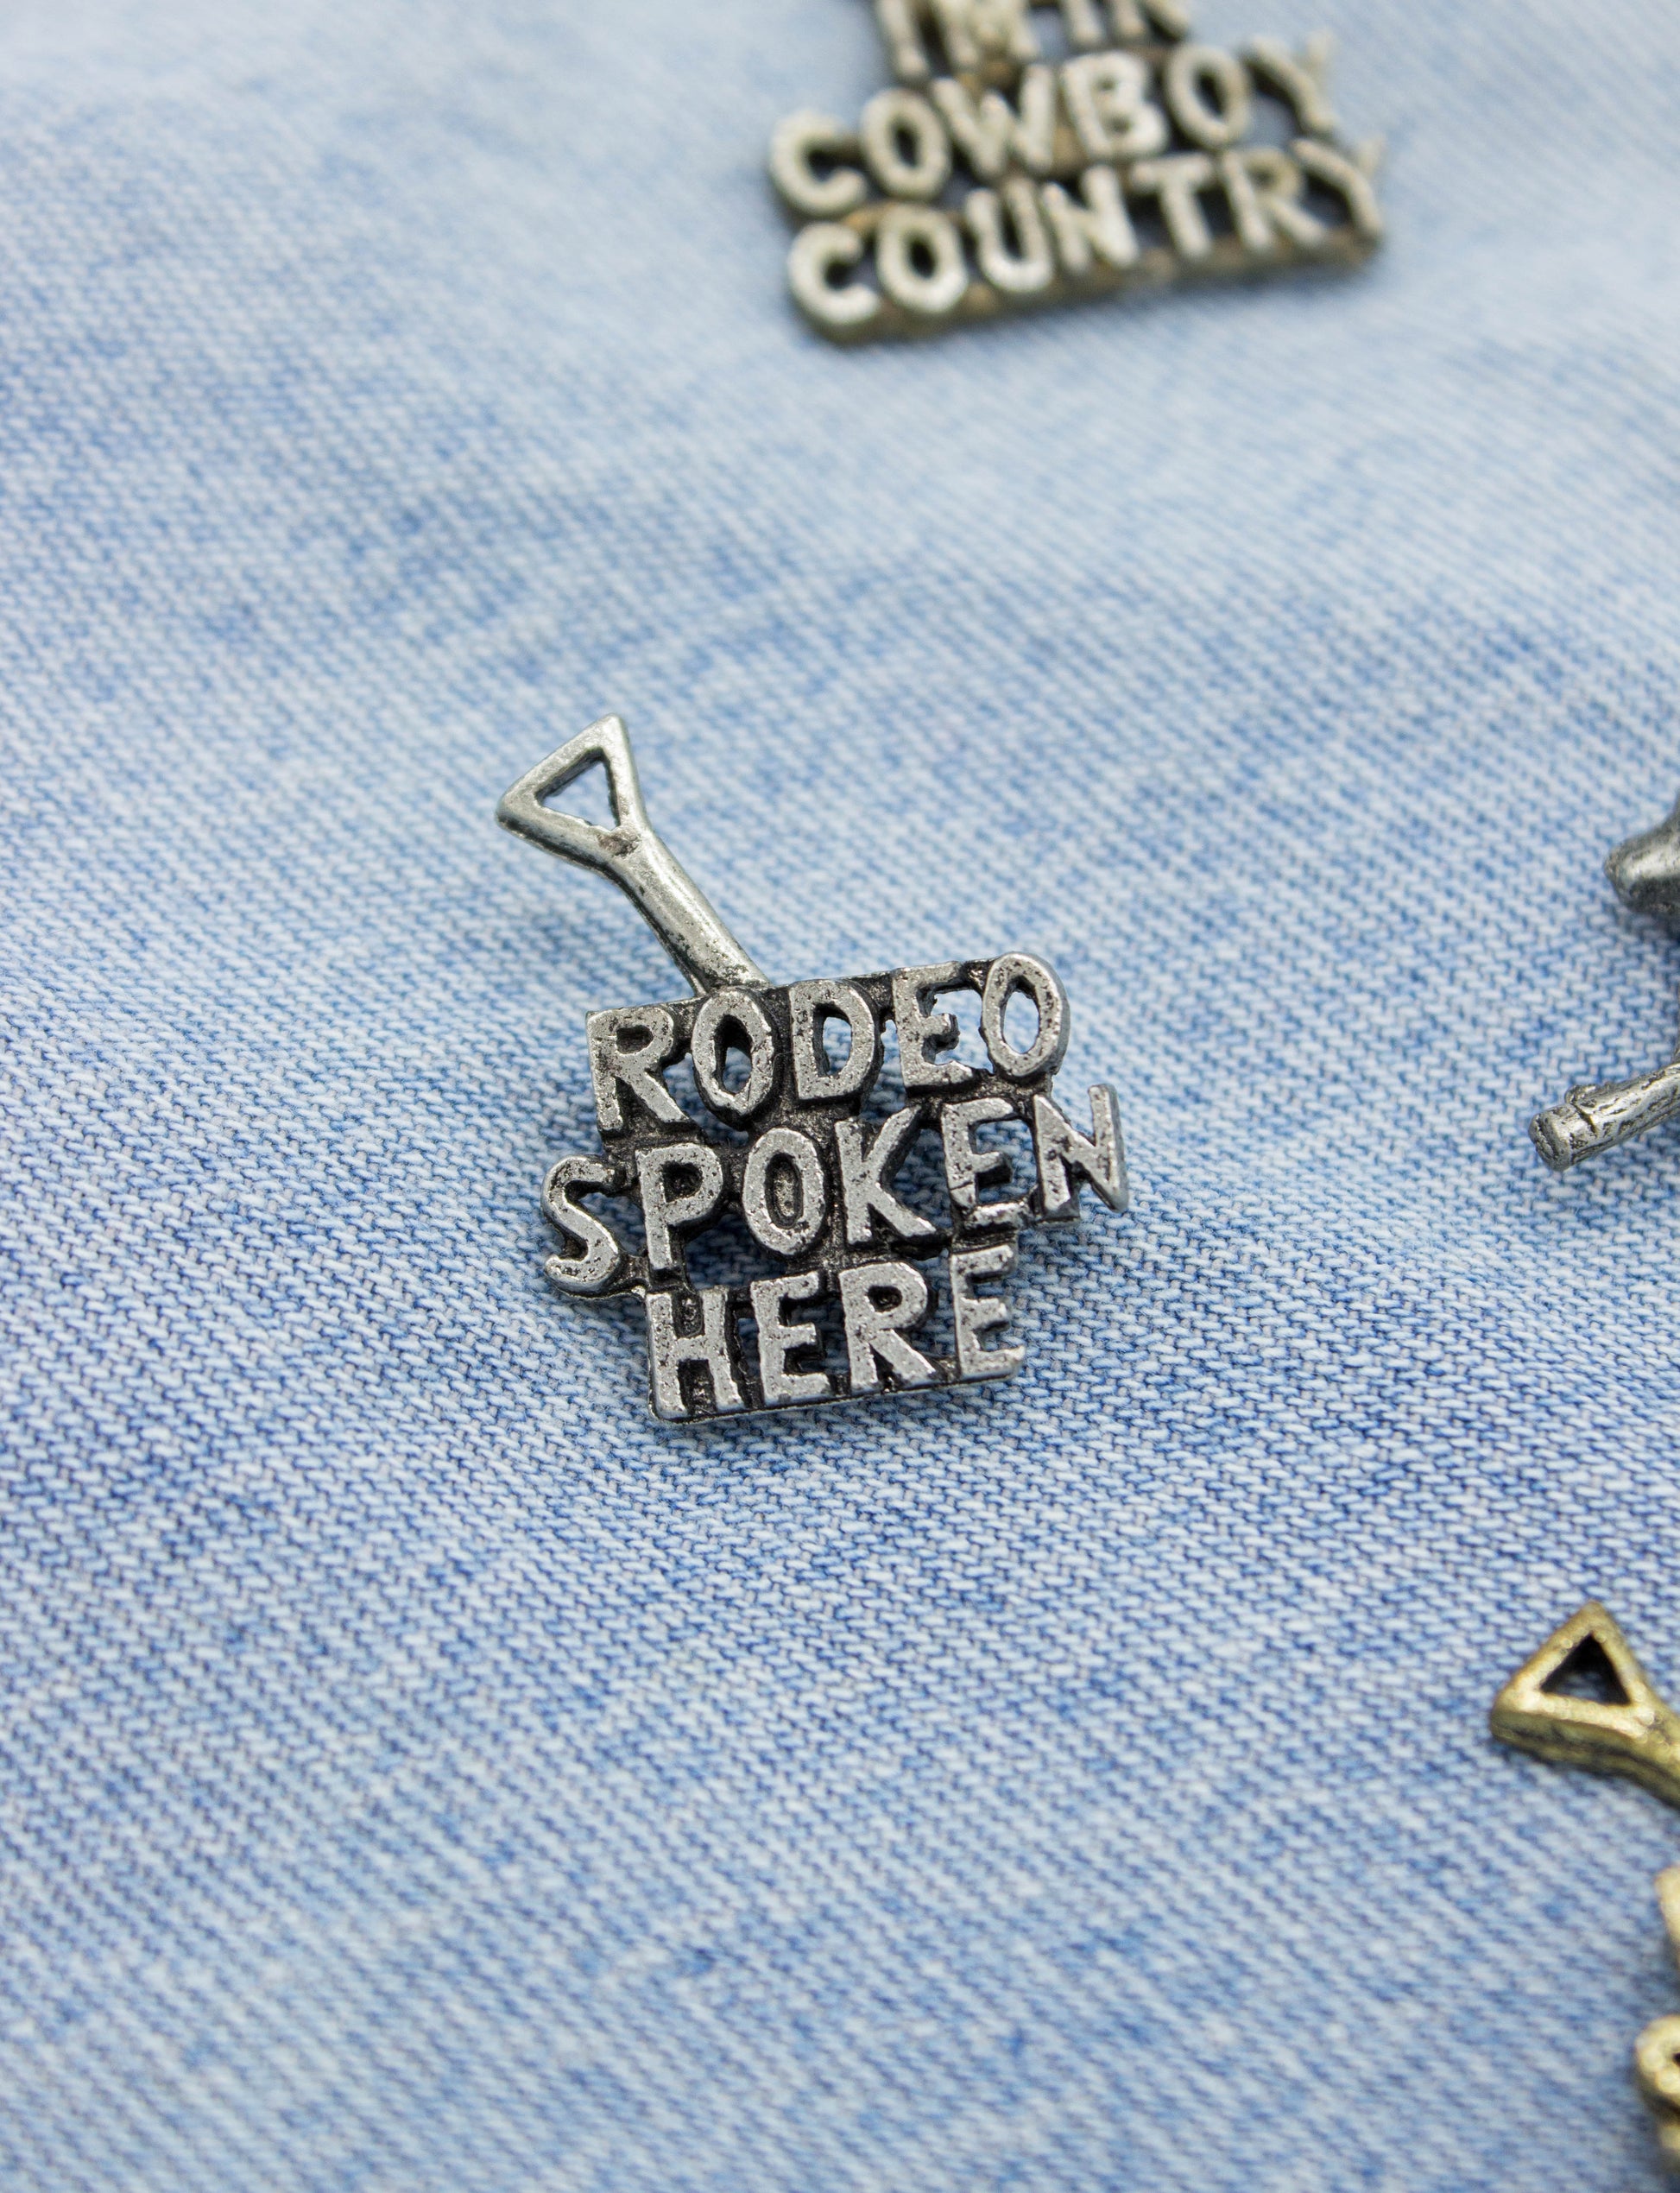 Vintage 70s Rodeo and Cowboy Pins